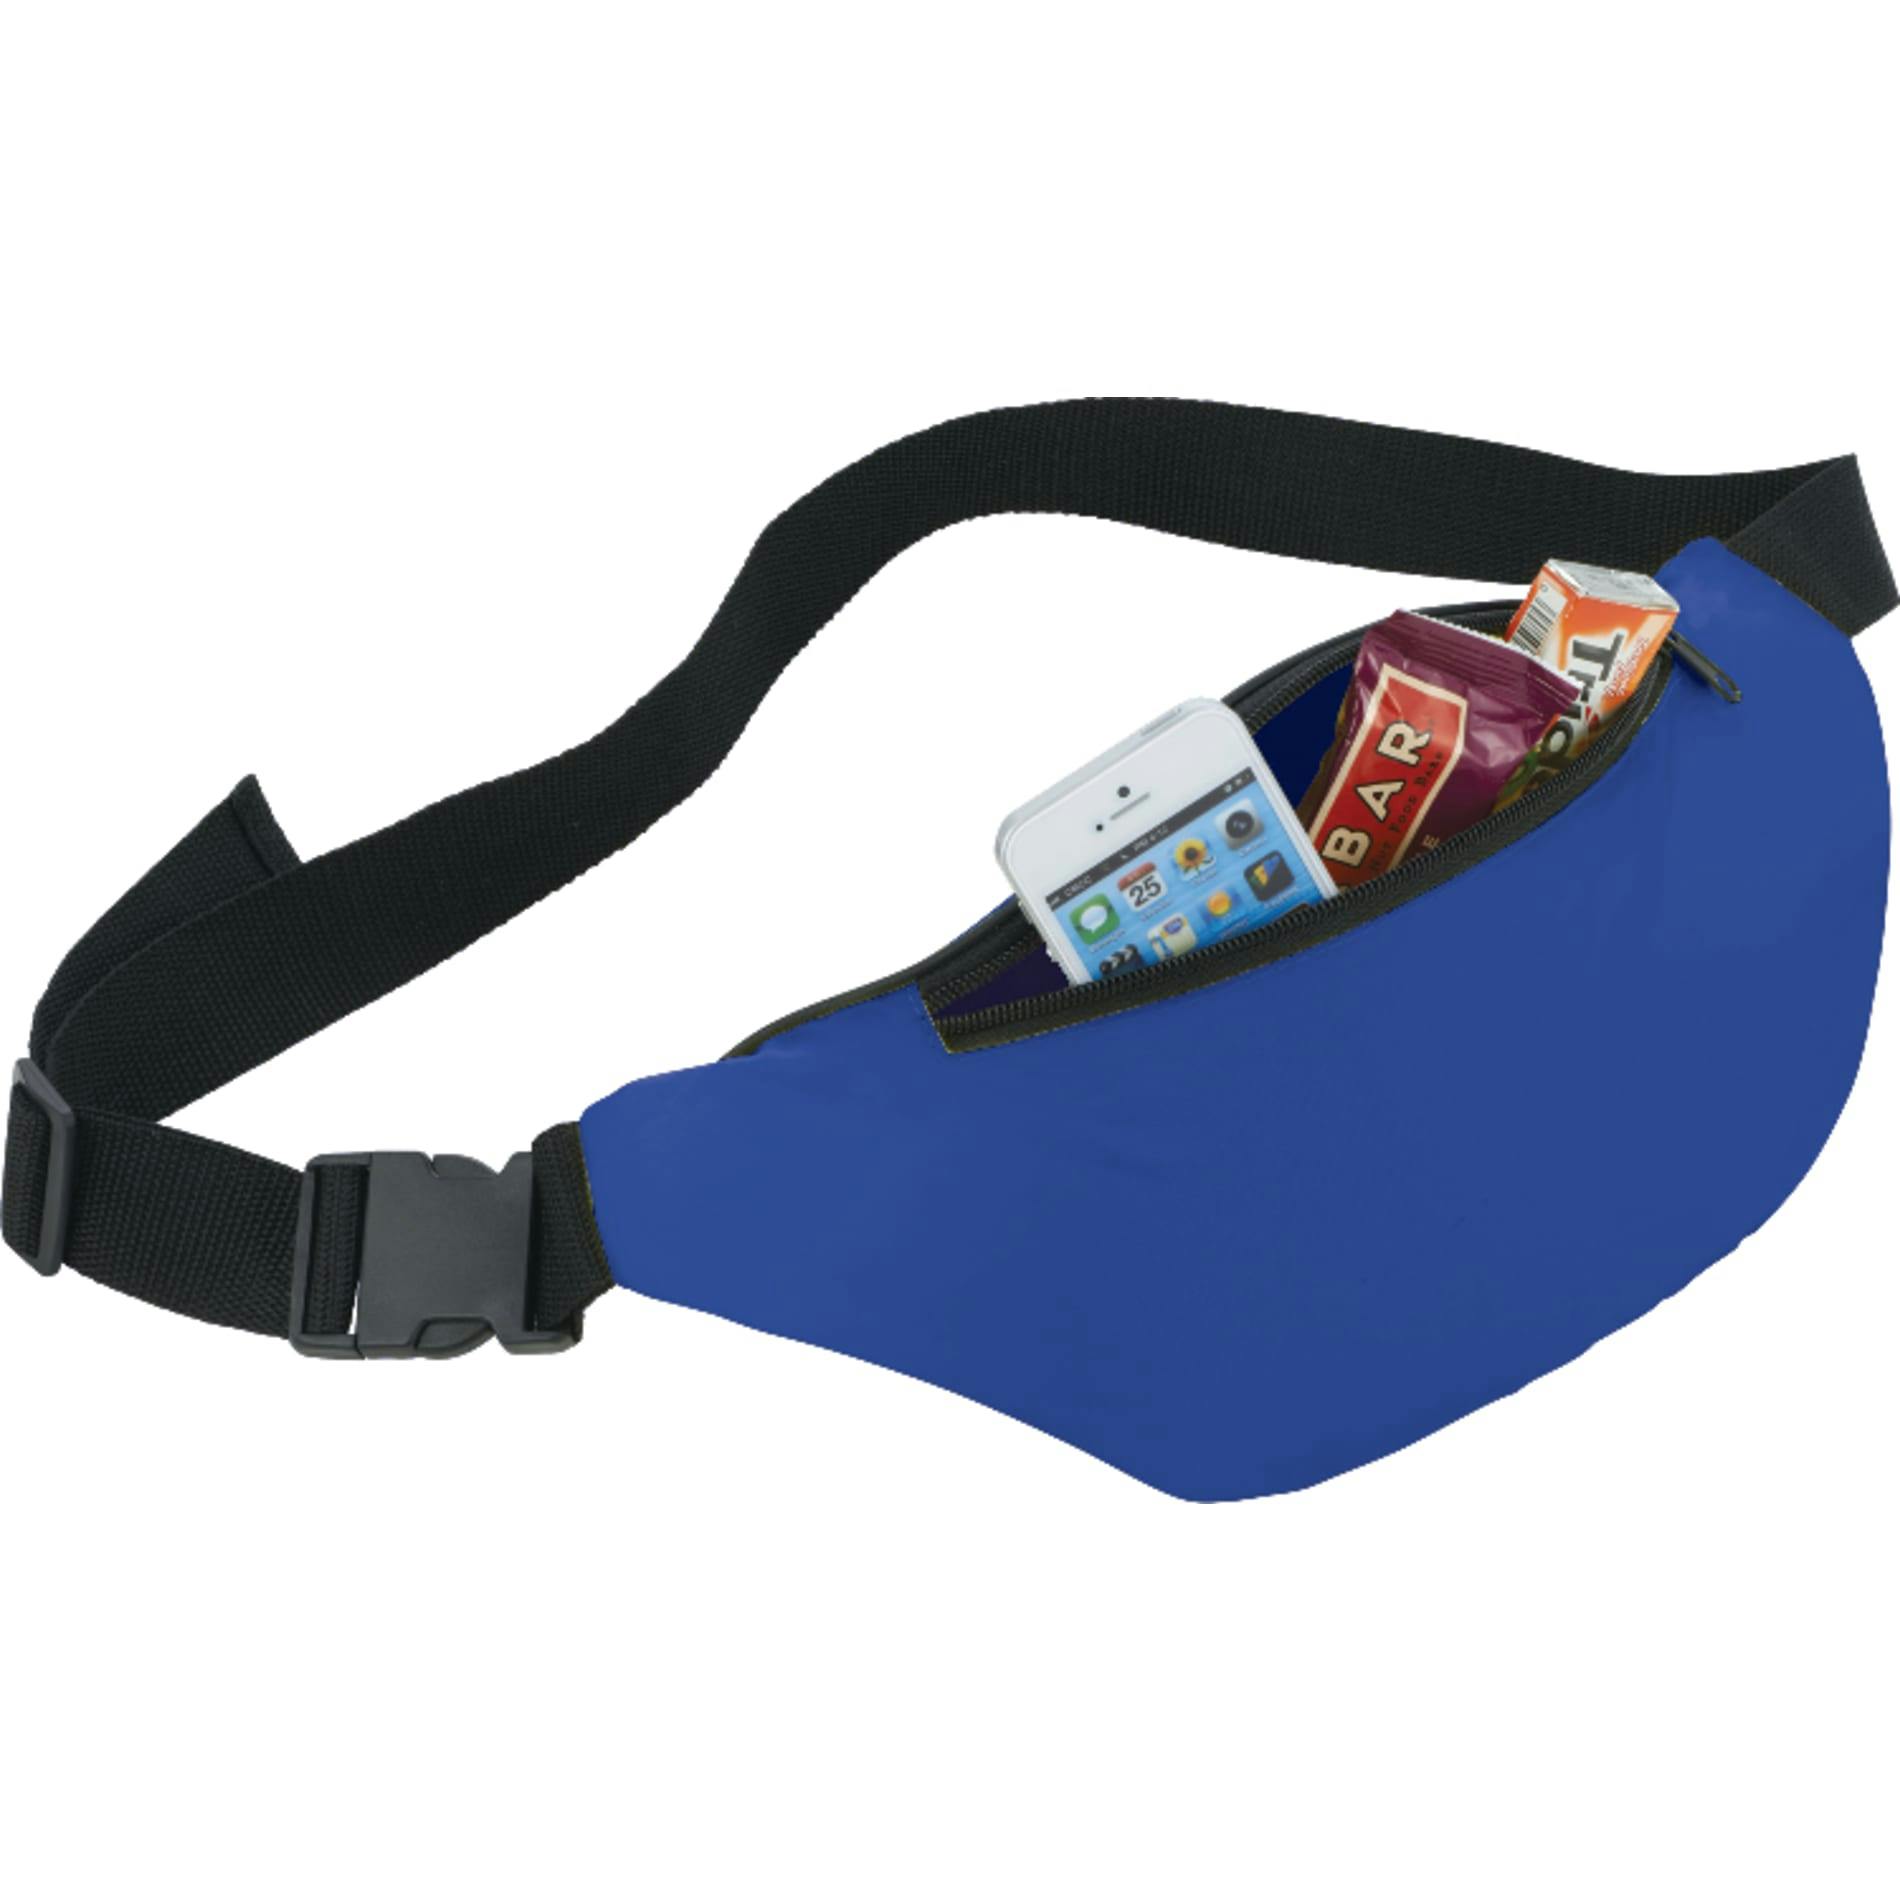 Hipster Budget Fanny Pack - additional Image 3